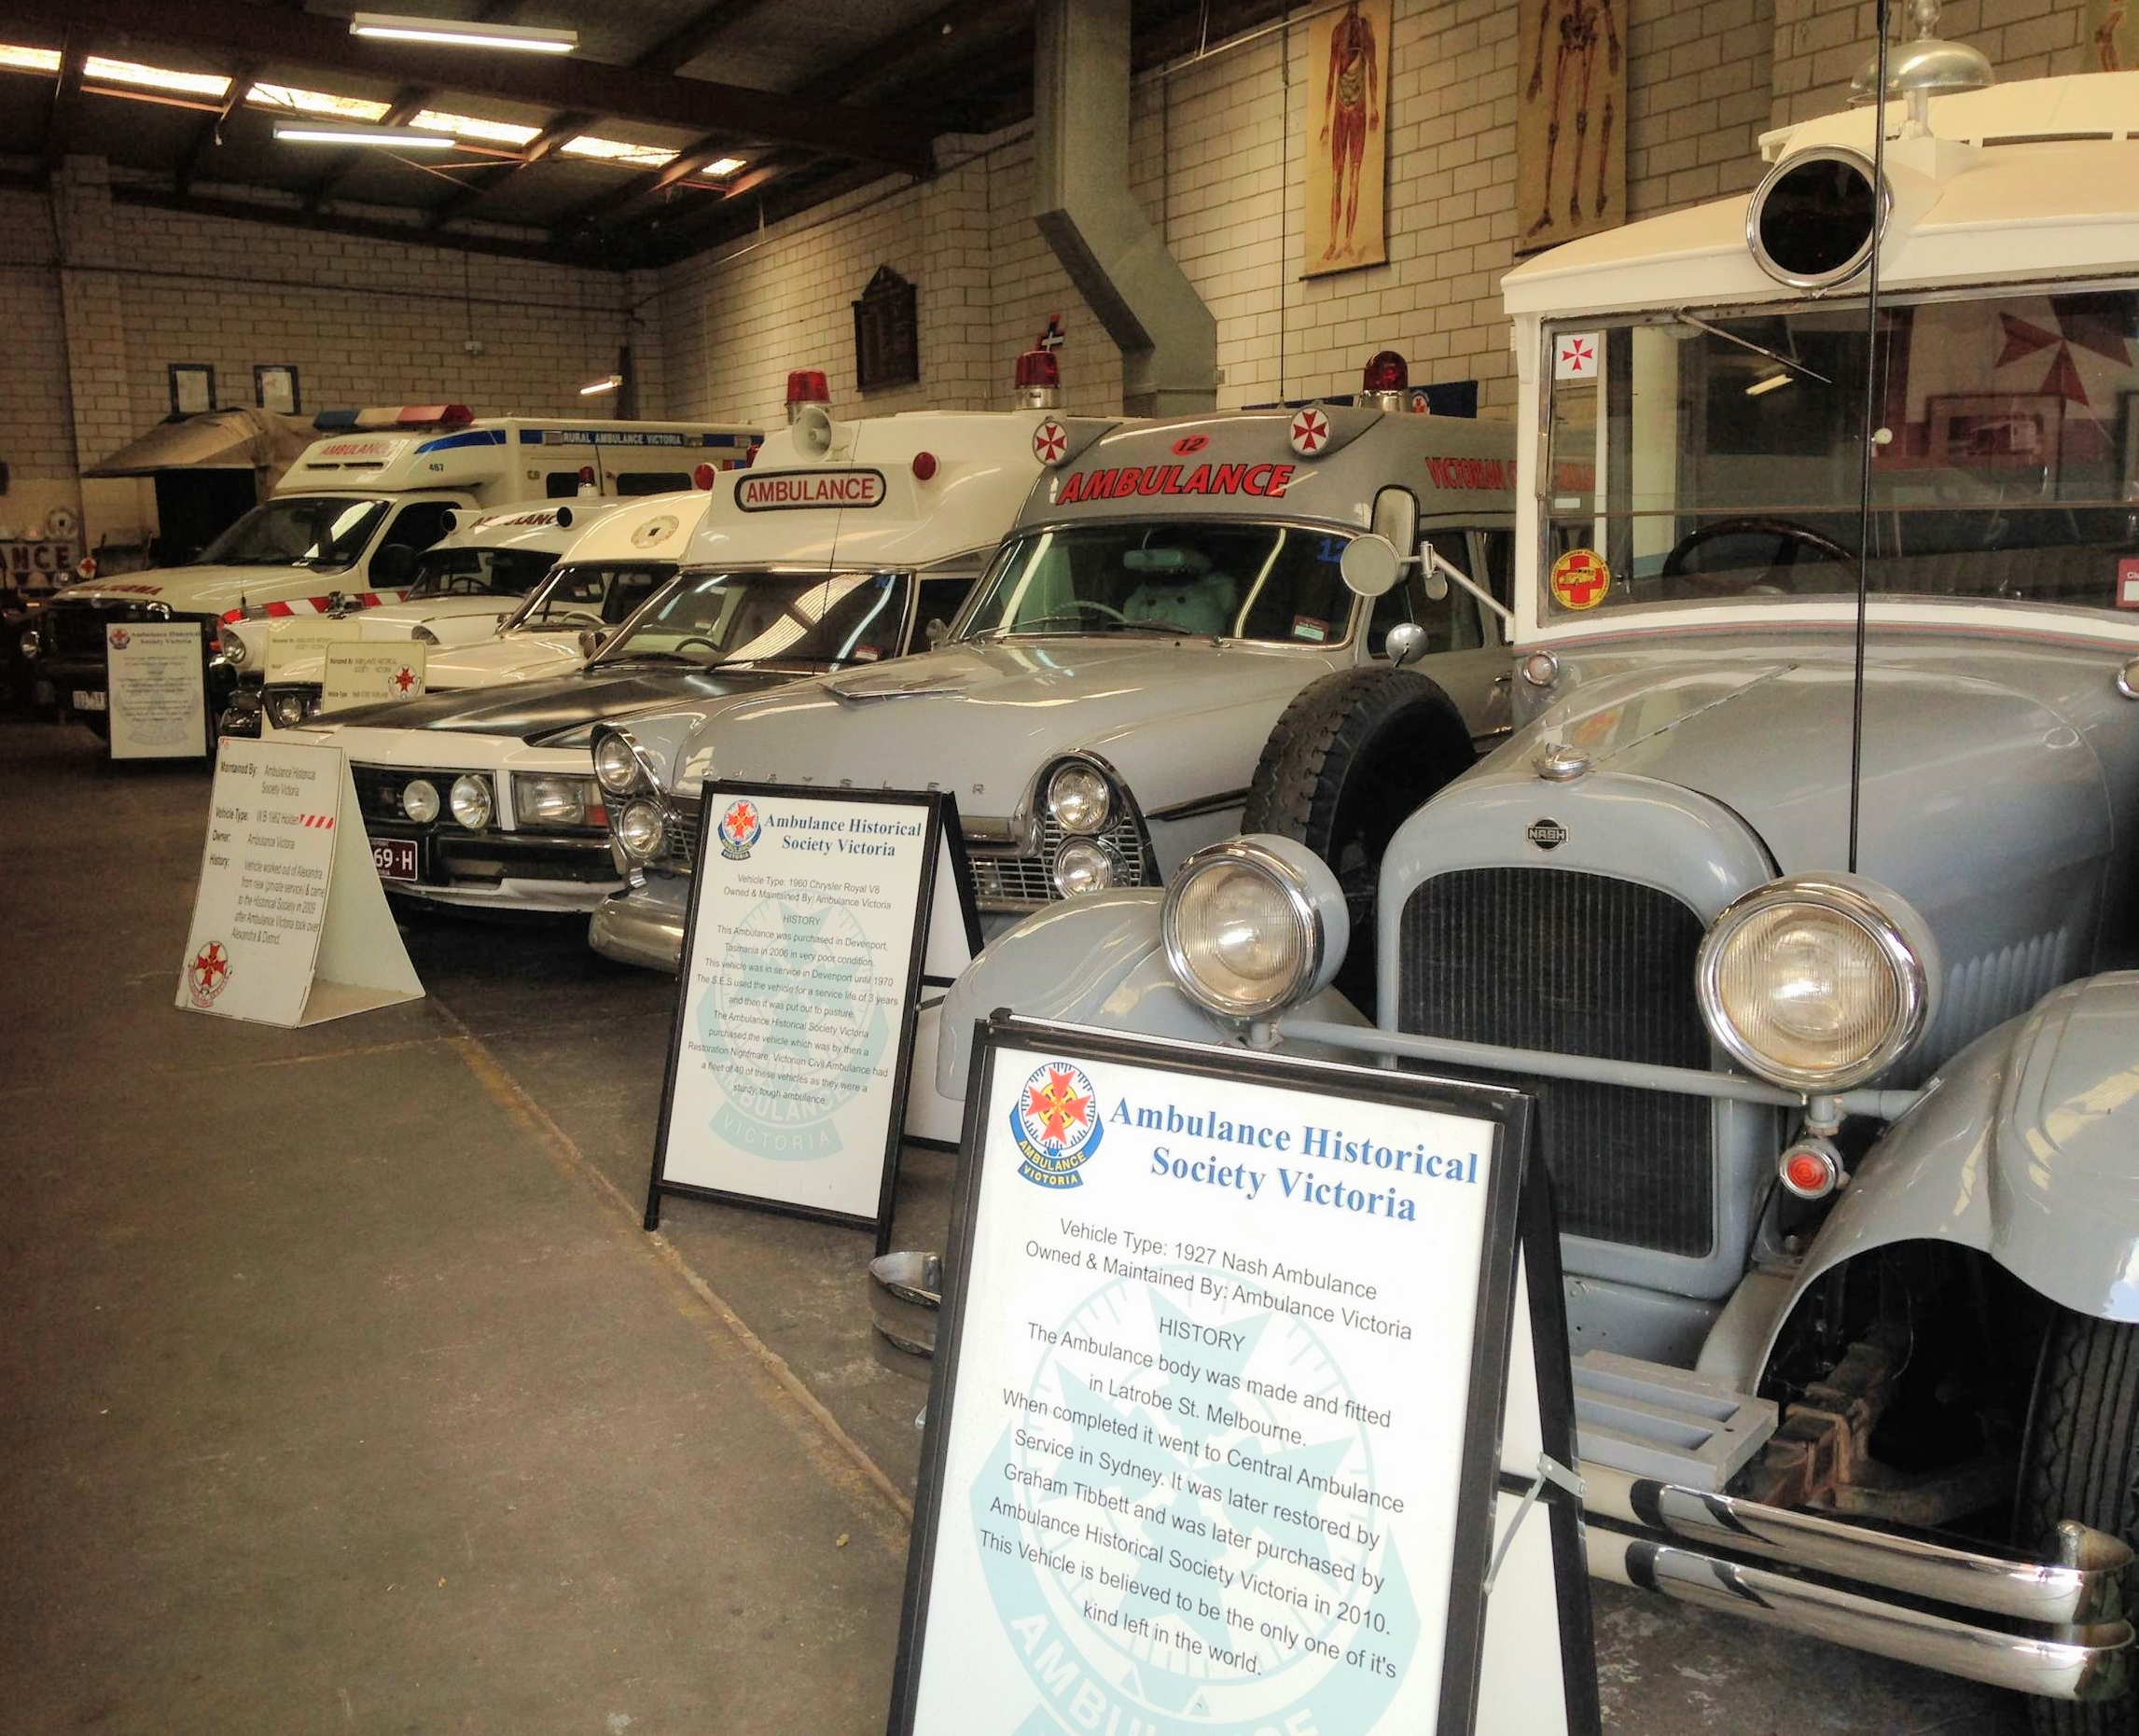  Just some of the ambulances at the Ambulance Victoria Historical Society Museum in Thomastown 